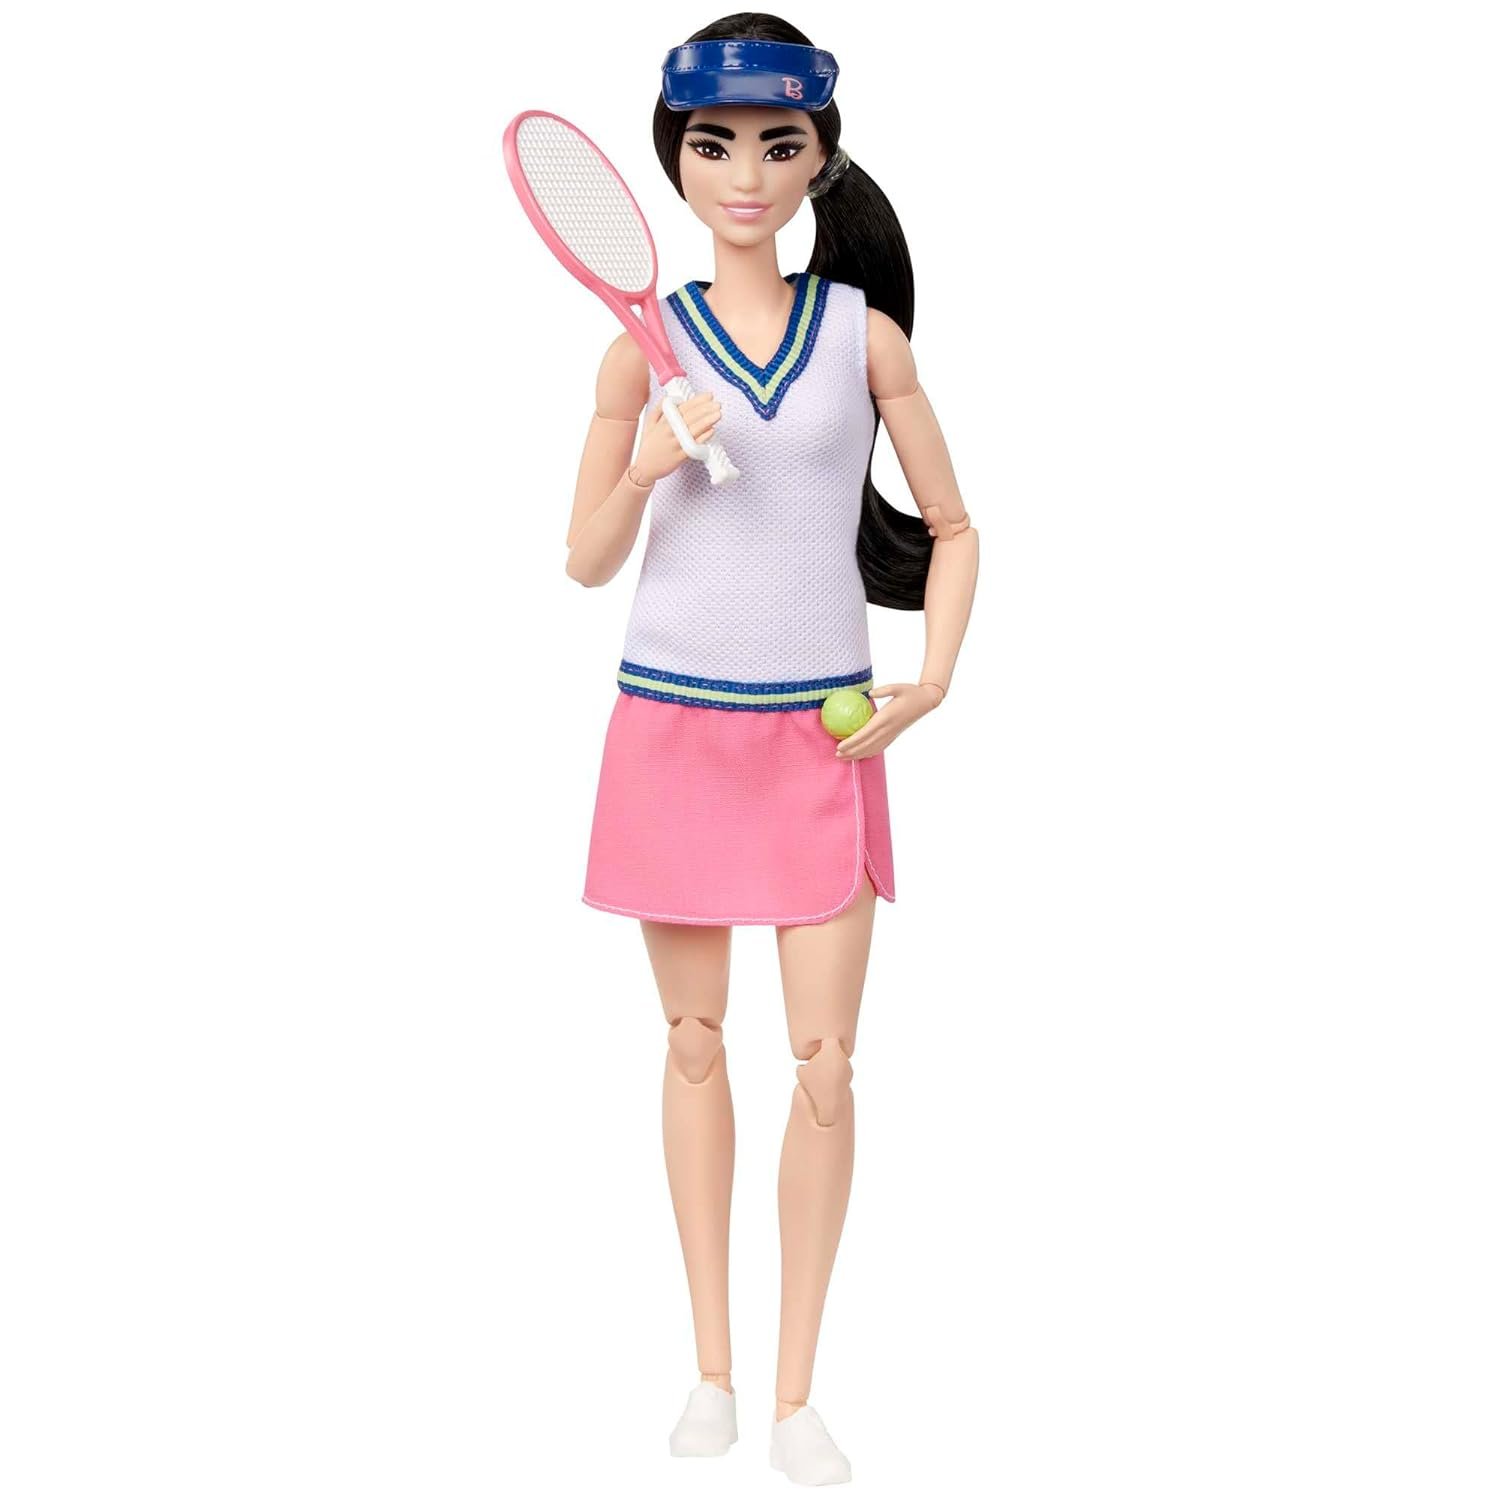 Barbie Tennis Player Doll image 1